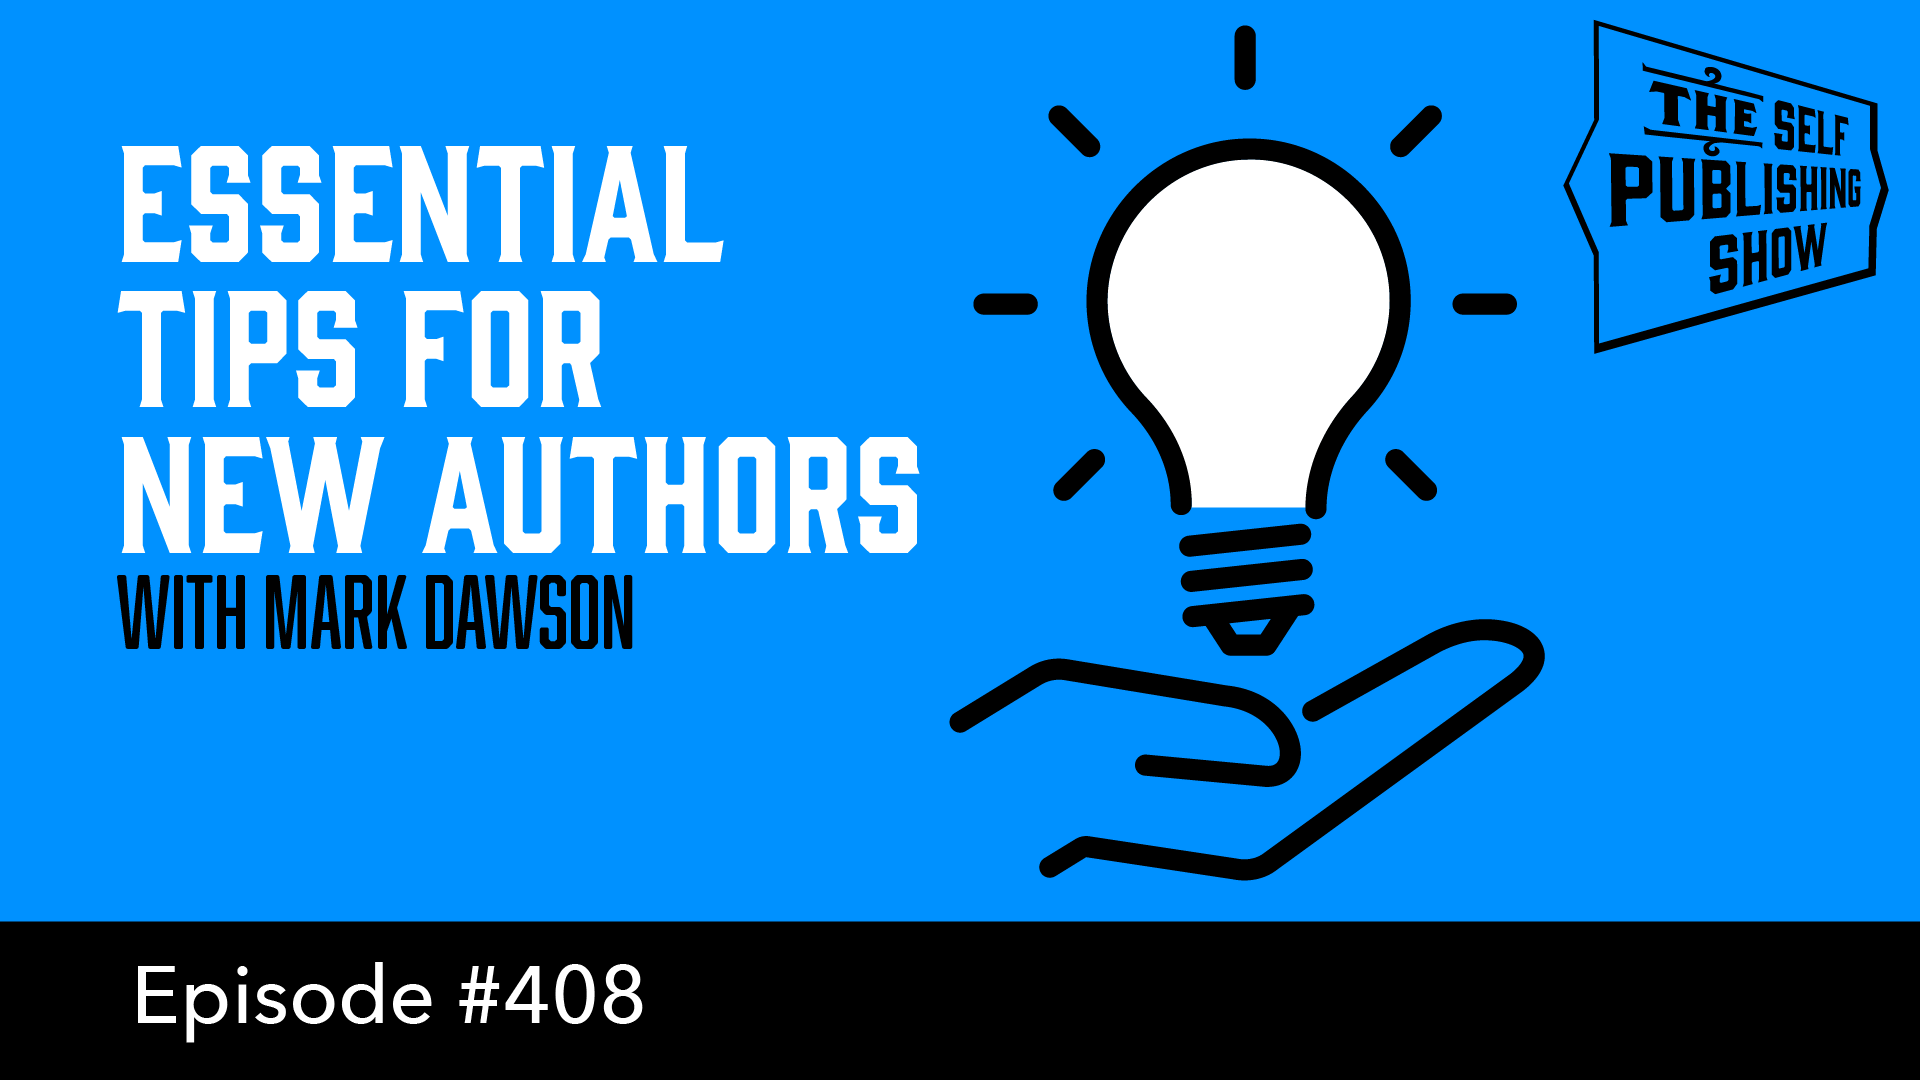 SPS-408: Essential Tips for New Authors – with Mark Dawson